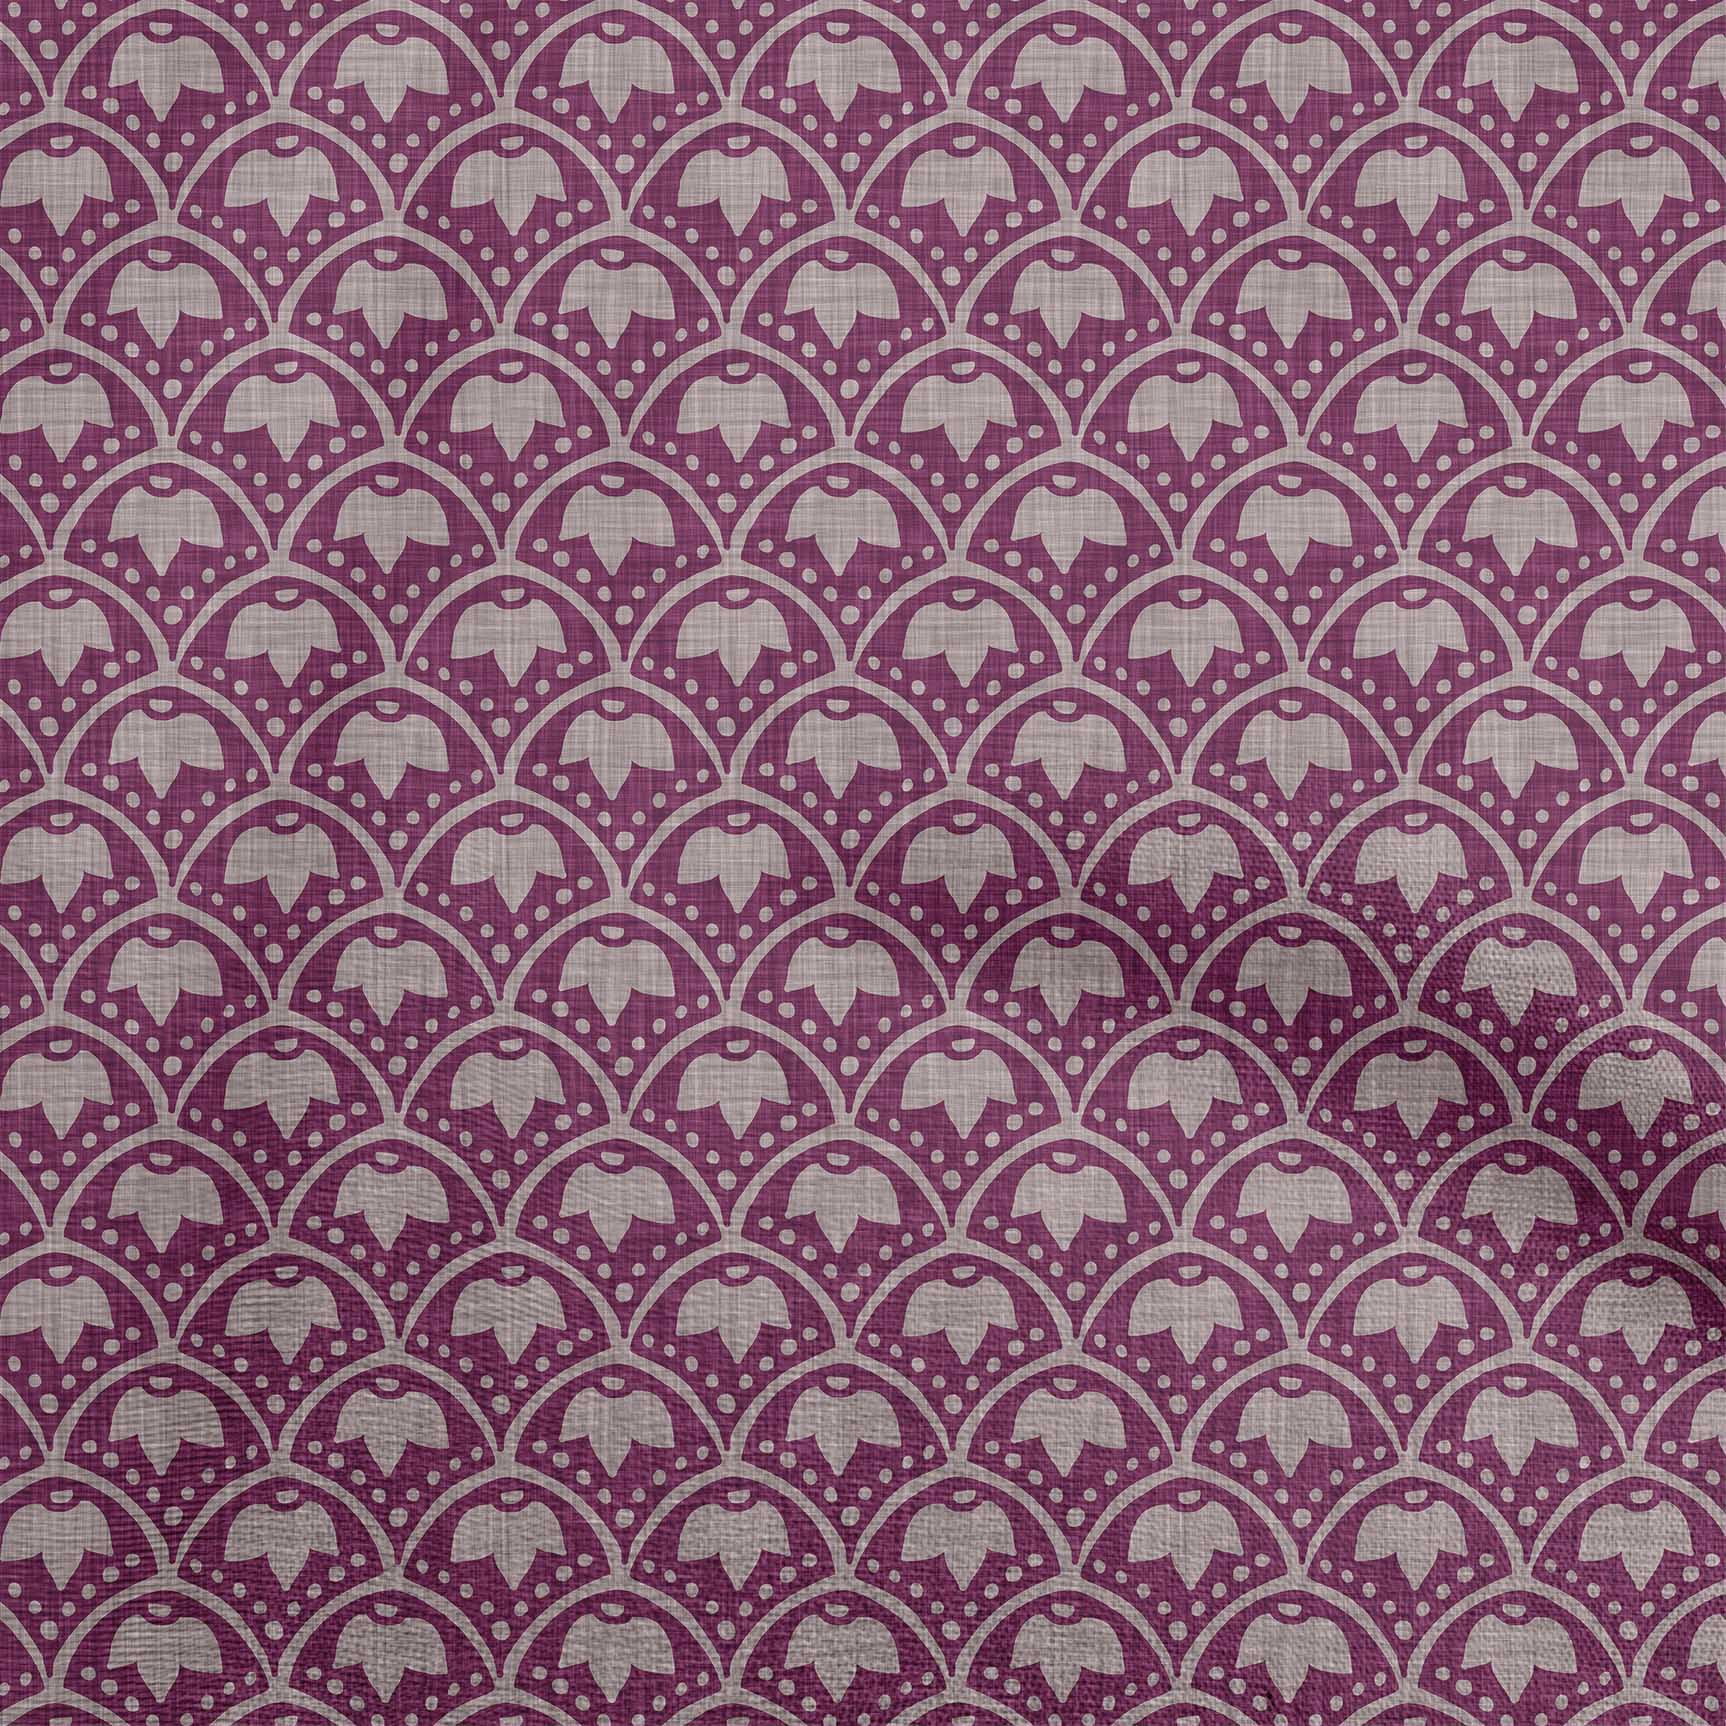  oneOone Viscose Jersey Magenta Fabric Block Sewing Craft  Projects Fabric Prints by Yard 60 Inch Wide-LV : Everything Else